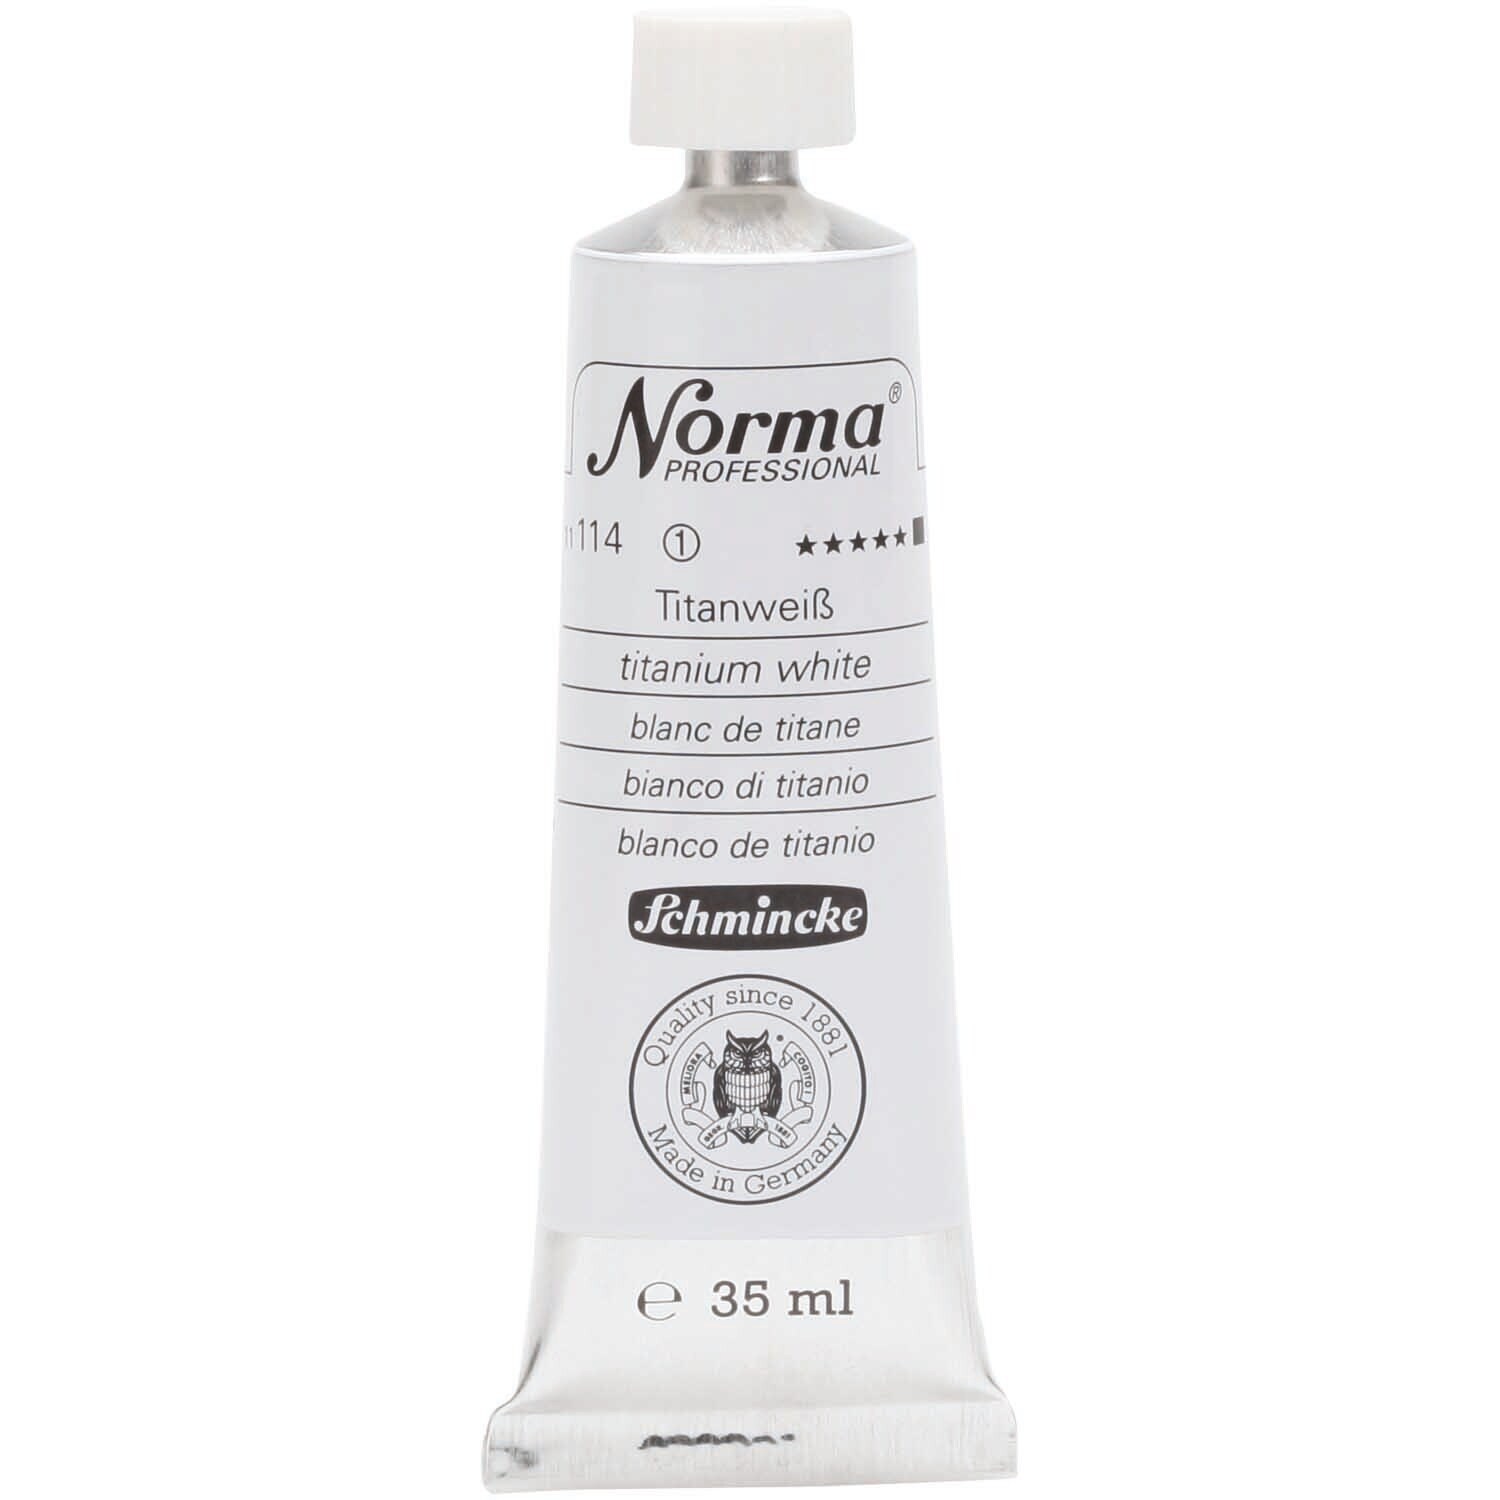 Norma 35ml